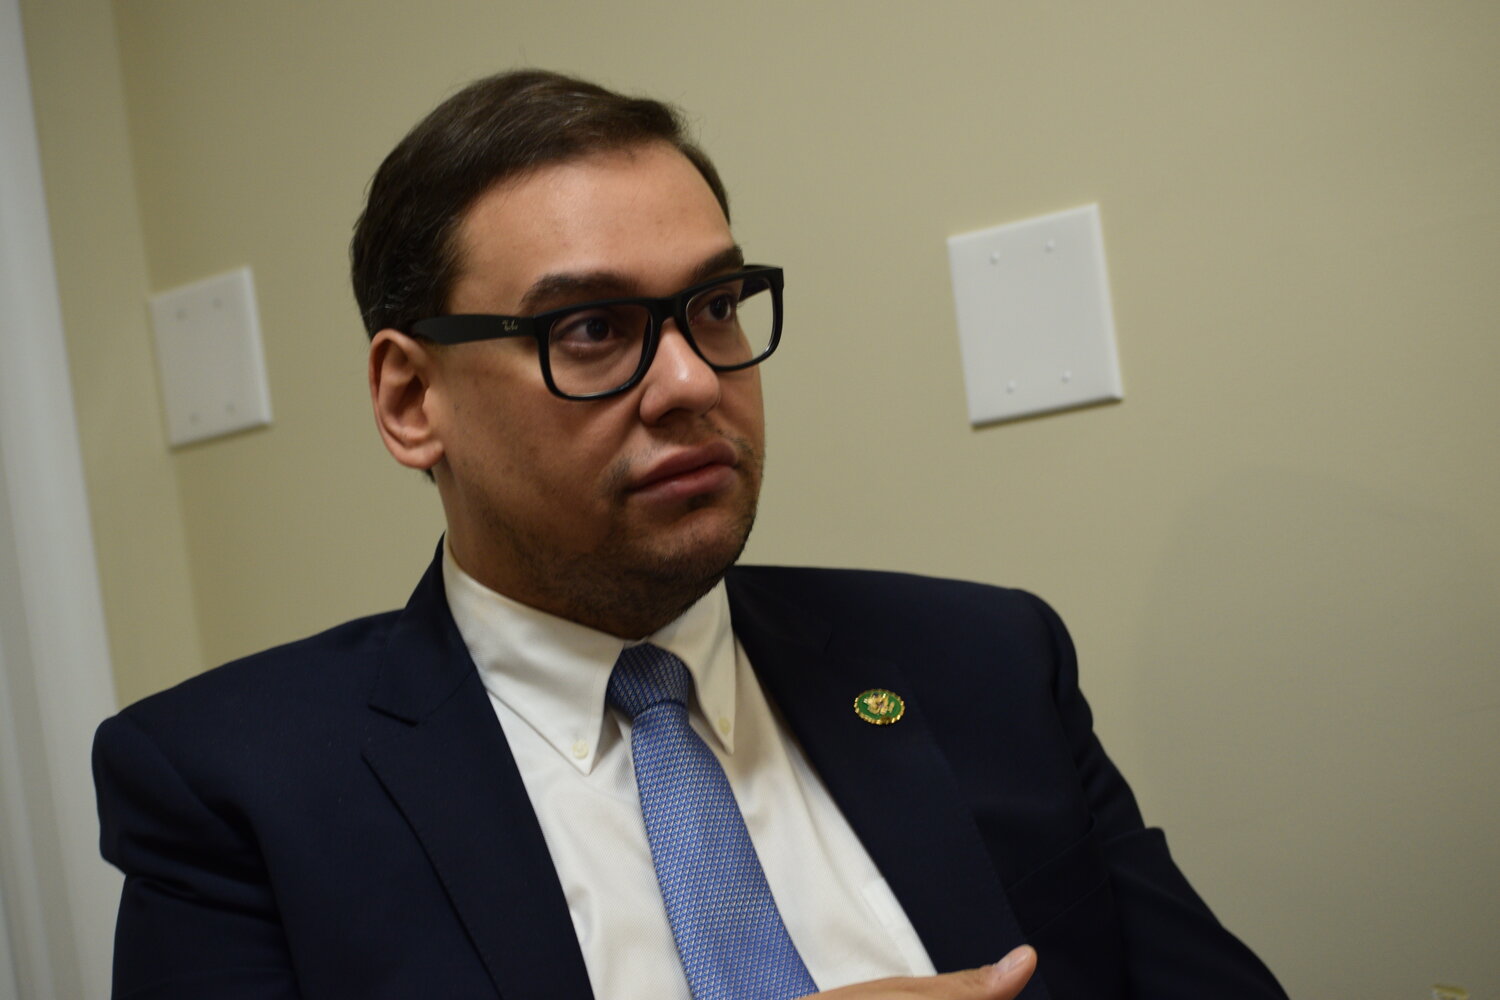 In recent weeks, freshman U.S. Rep. George Santos has said he’s not interested in a plea deal but didn’t rule one out at some point in the future.